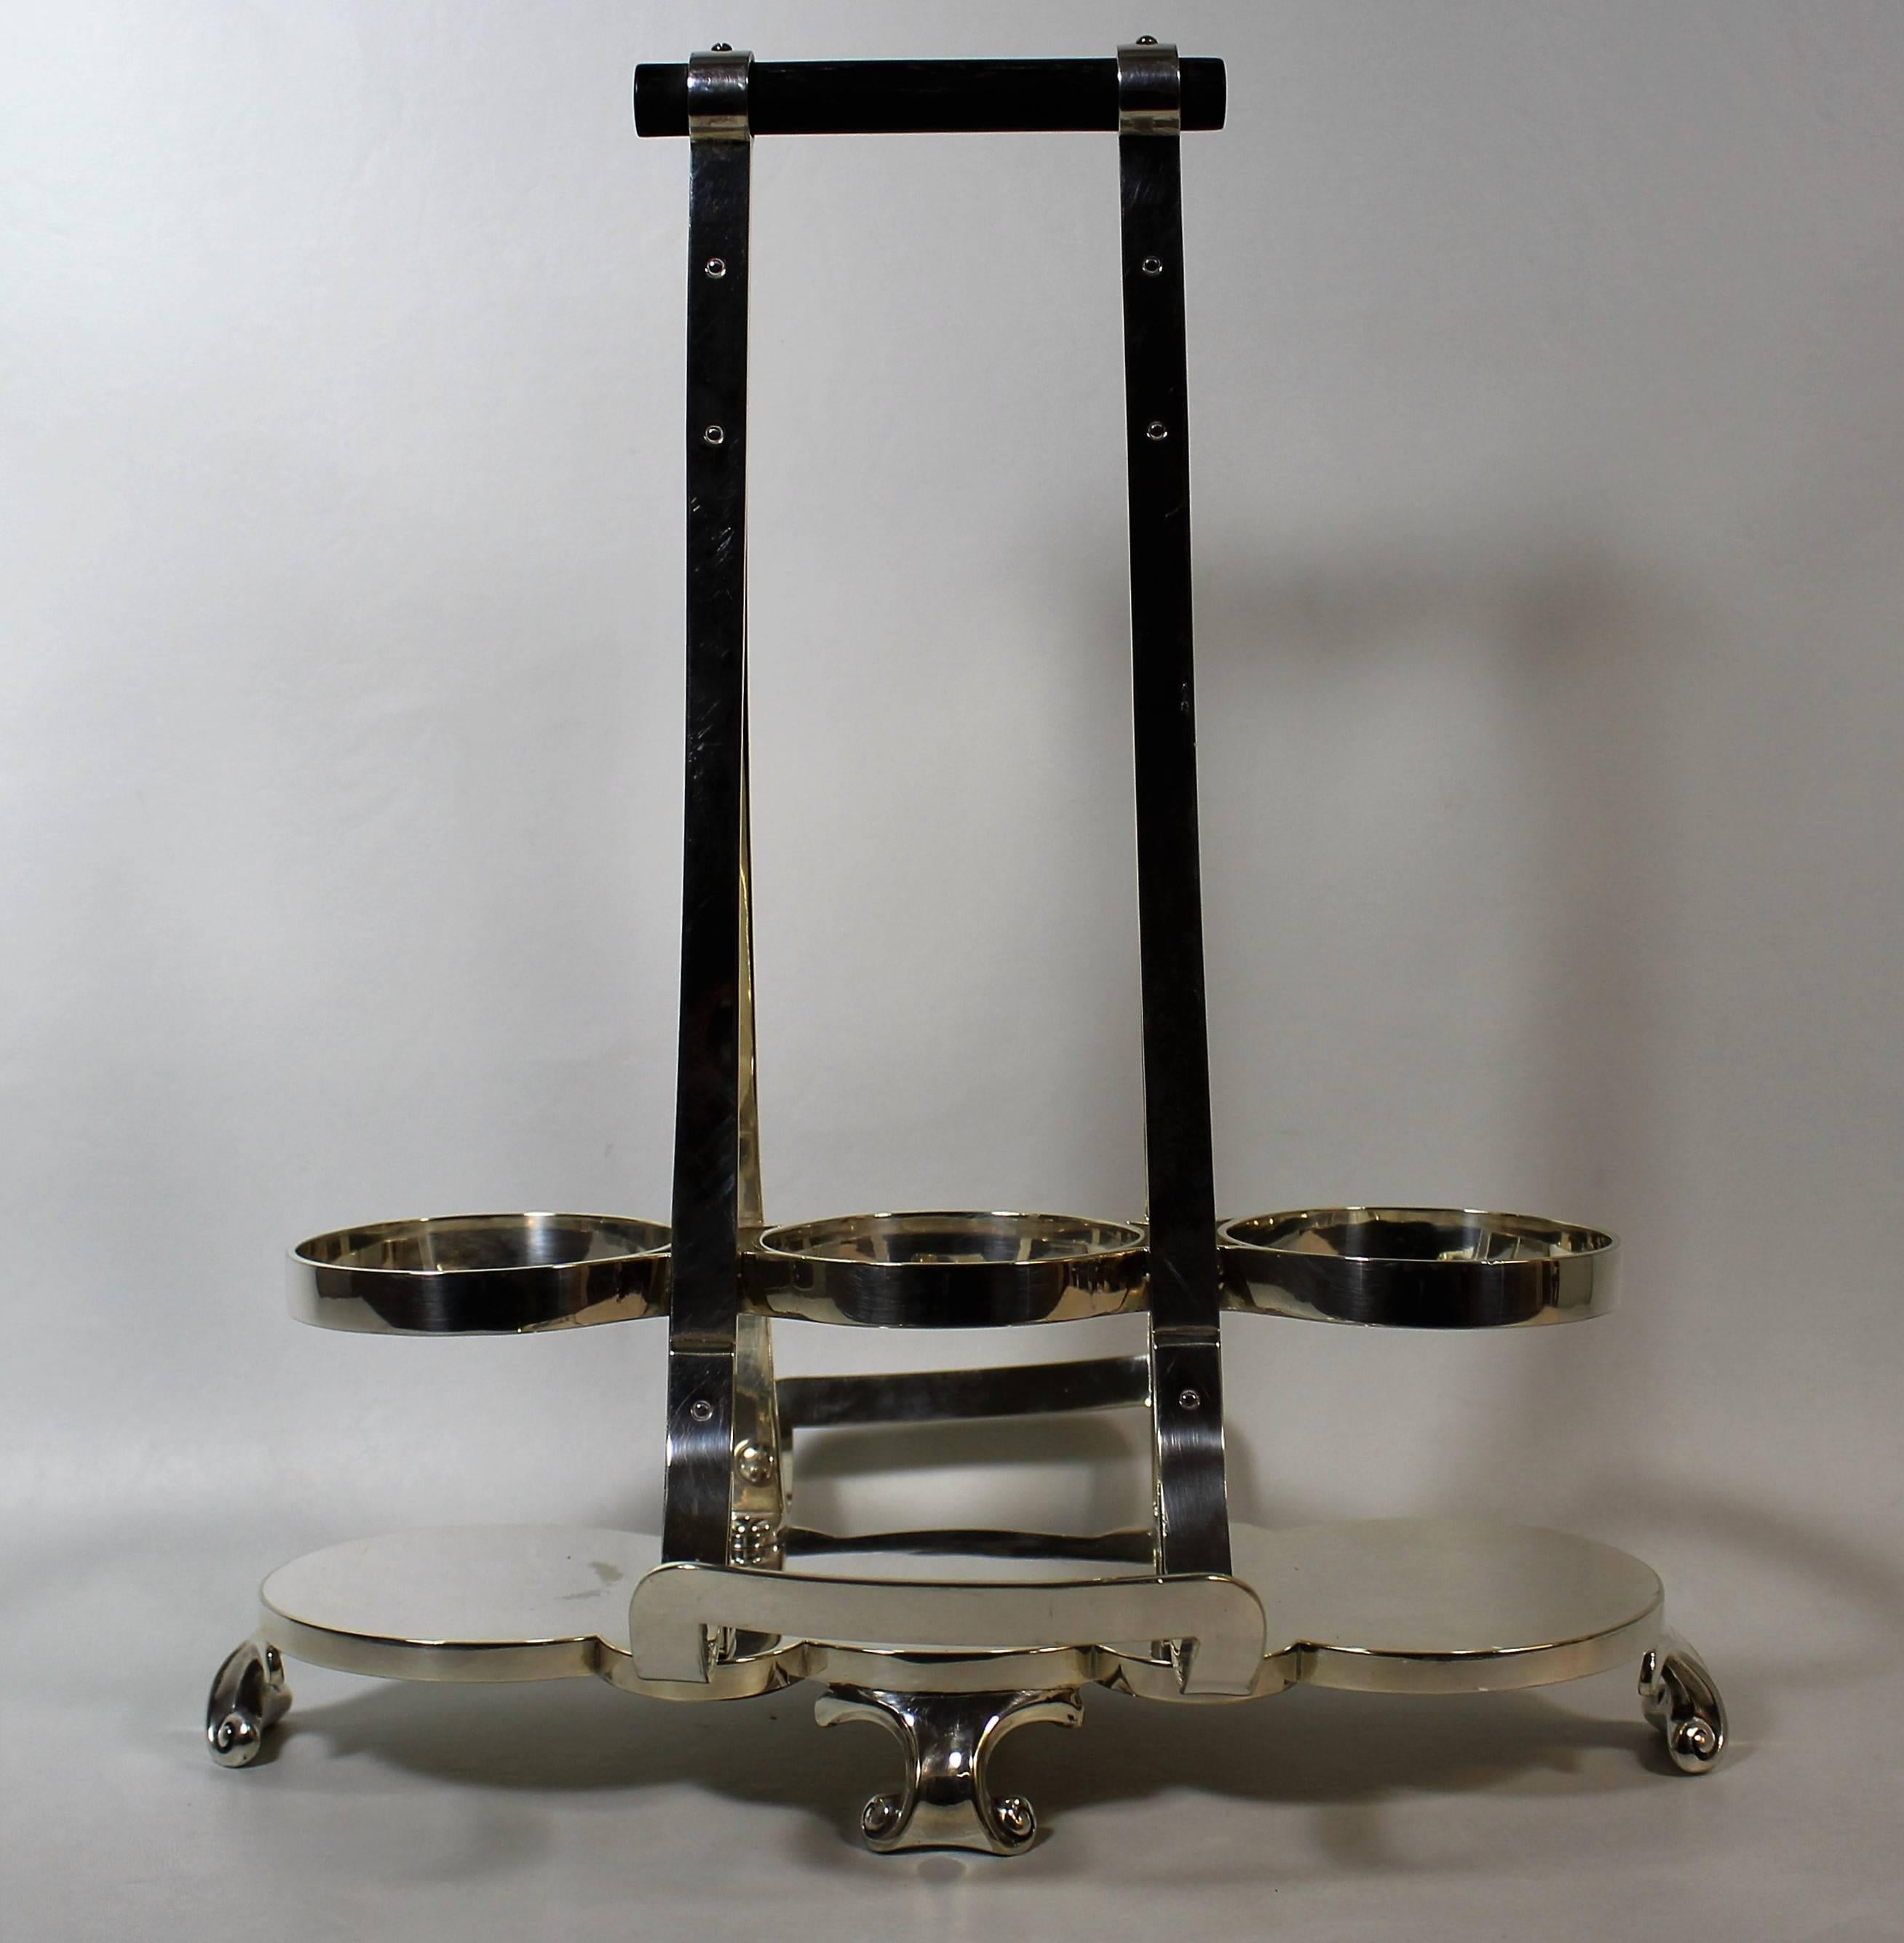 Aesthetic Movement silver plate Tantalus Wine Cradle (1834-1904) made by Hukin & Heath, Birmingham, England and done in the style of Christopher Dresser.